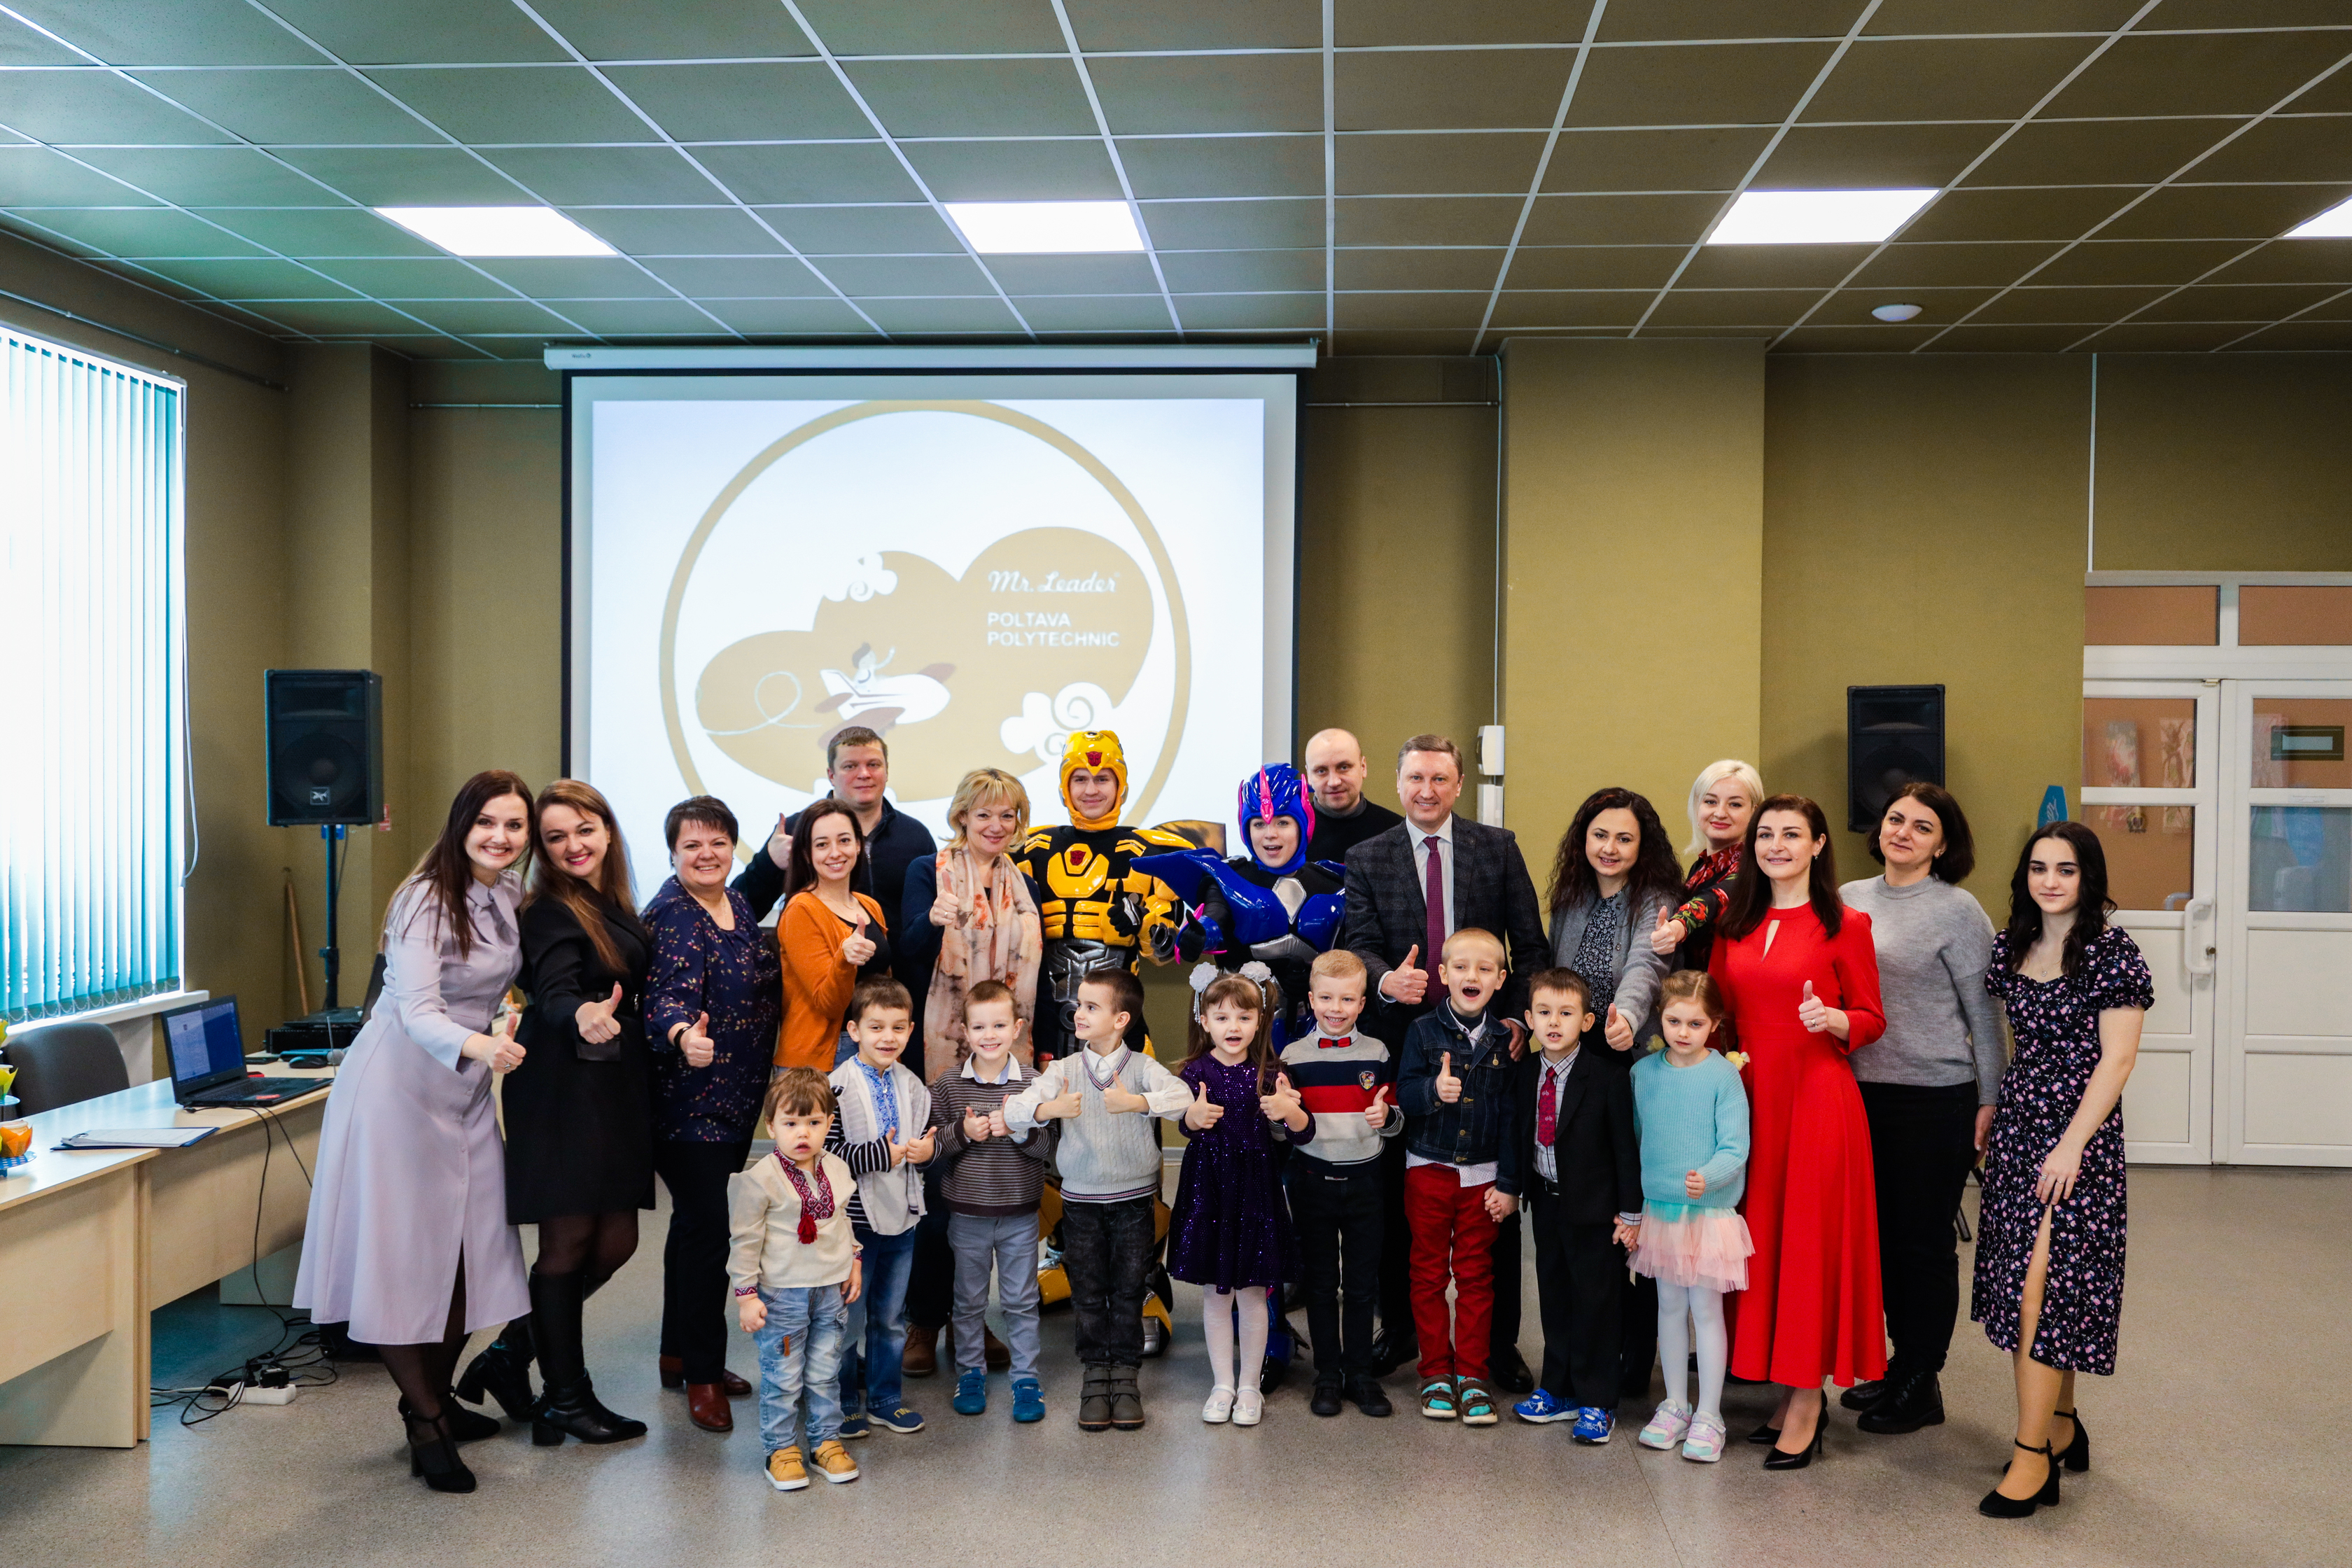 Spring holiday at the Polytechnic: pupils of the Center for Education and Care of Preschool Children "Mr.Leader" are given an animated fairy-tale performance